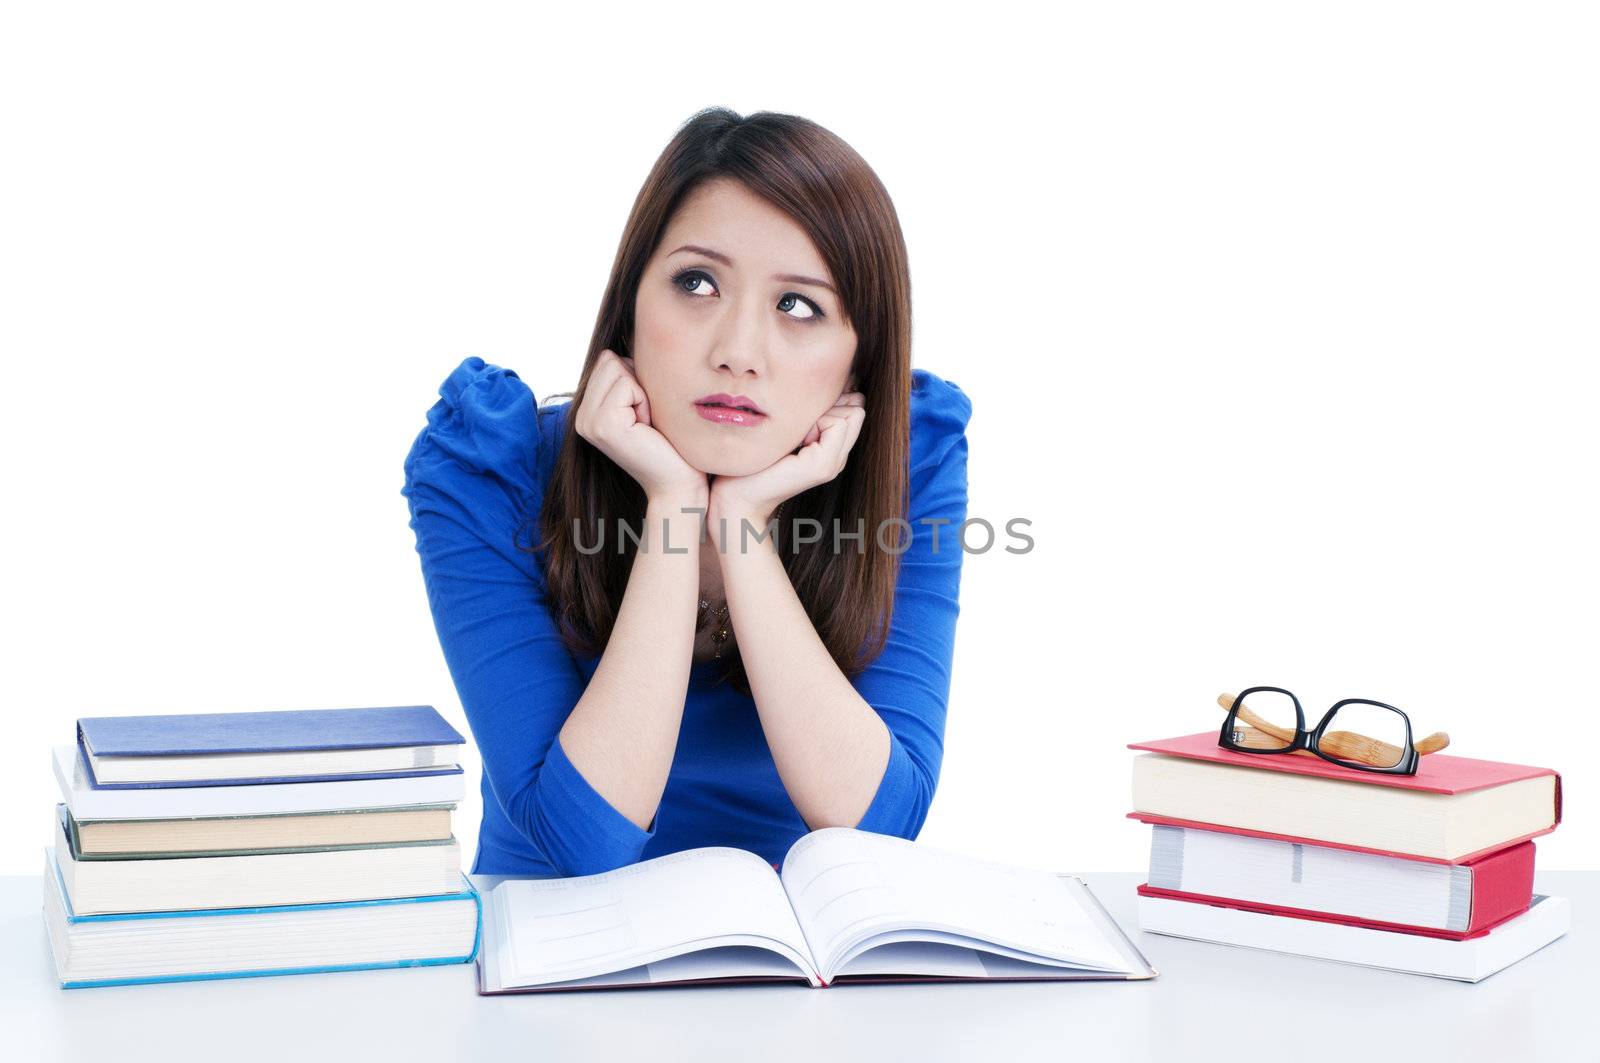 Portrait of a pensive female student with hands on chin over white background.